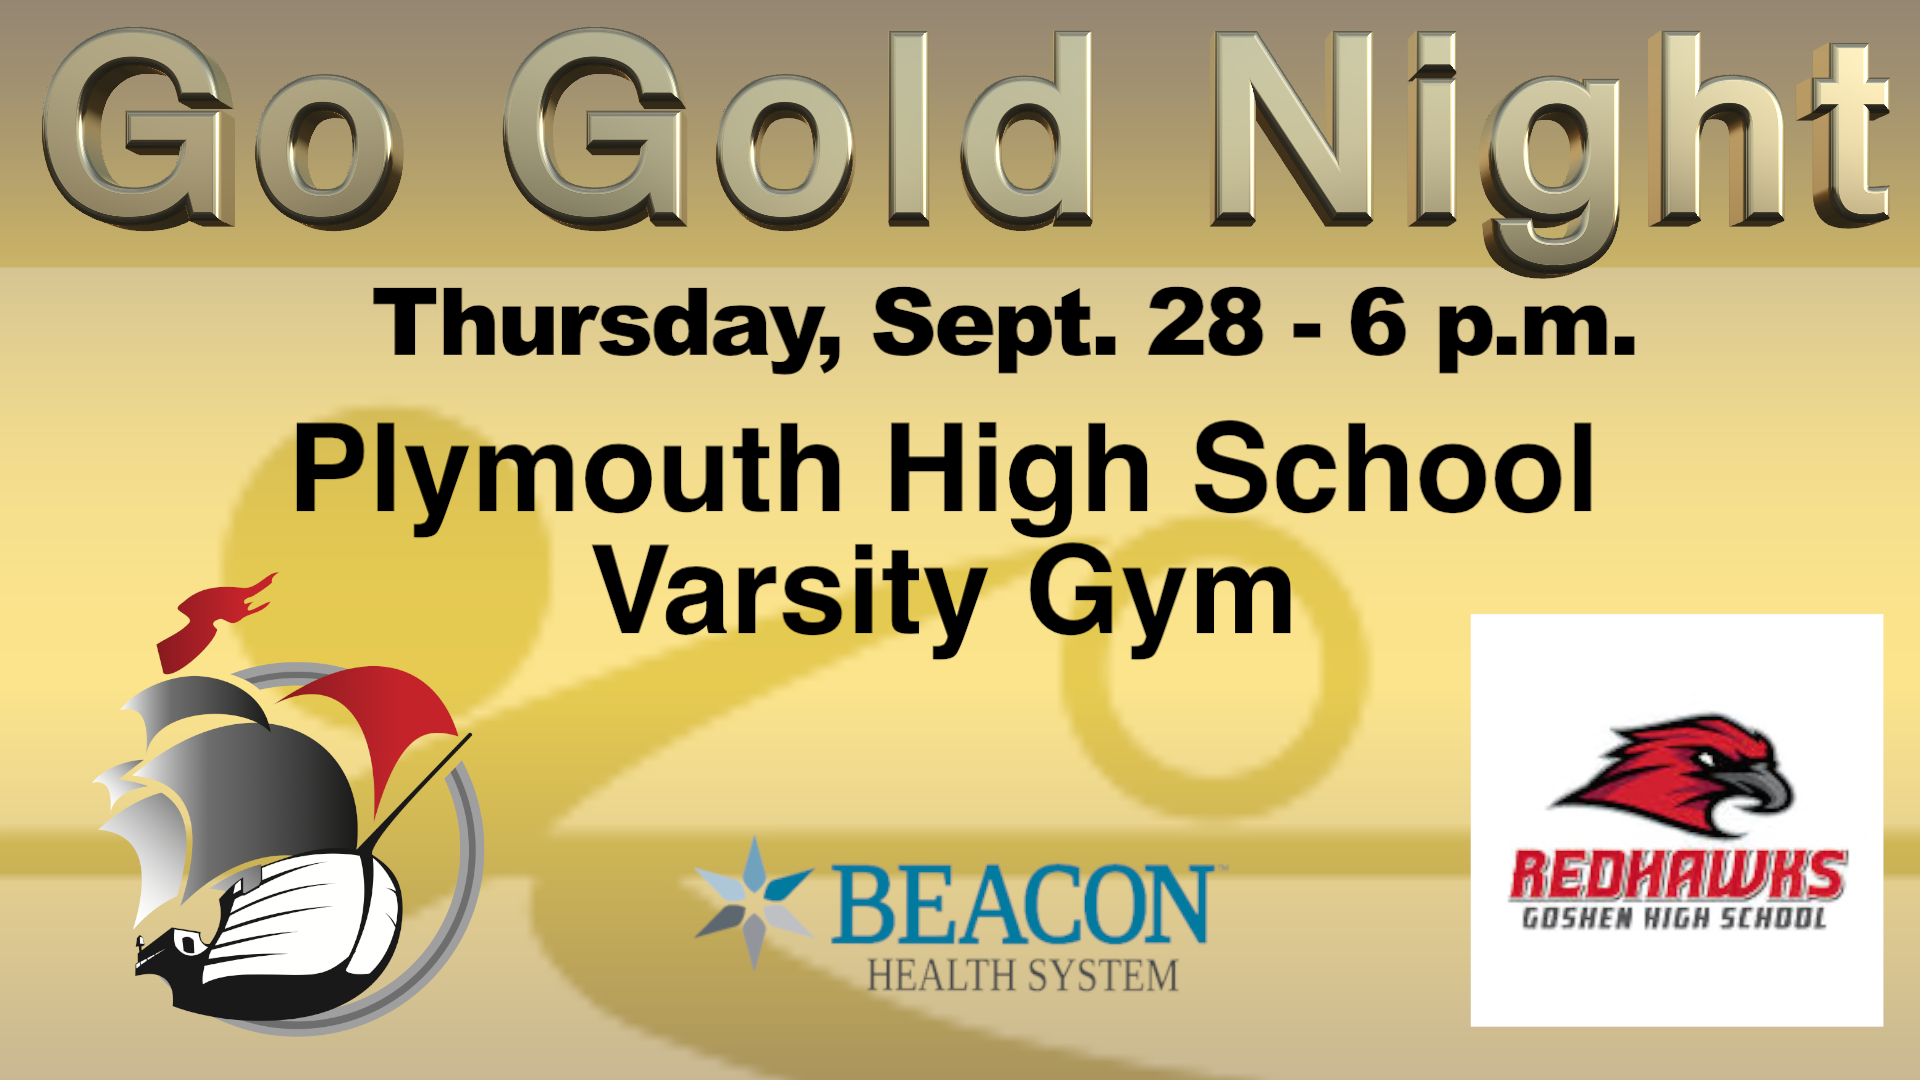 Go Gold Night at PHS on 09/28/2017